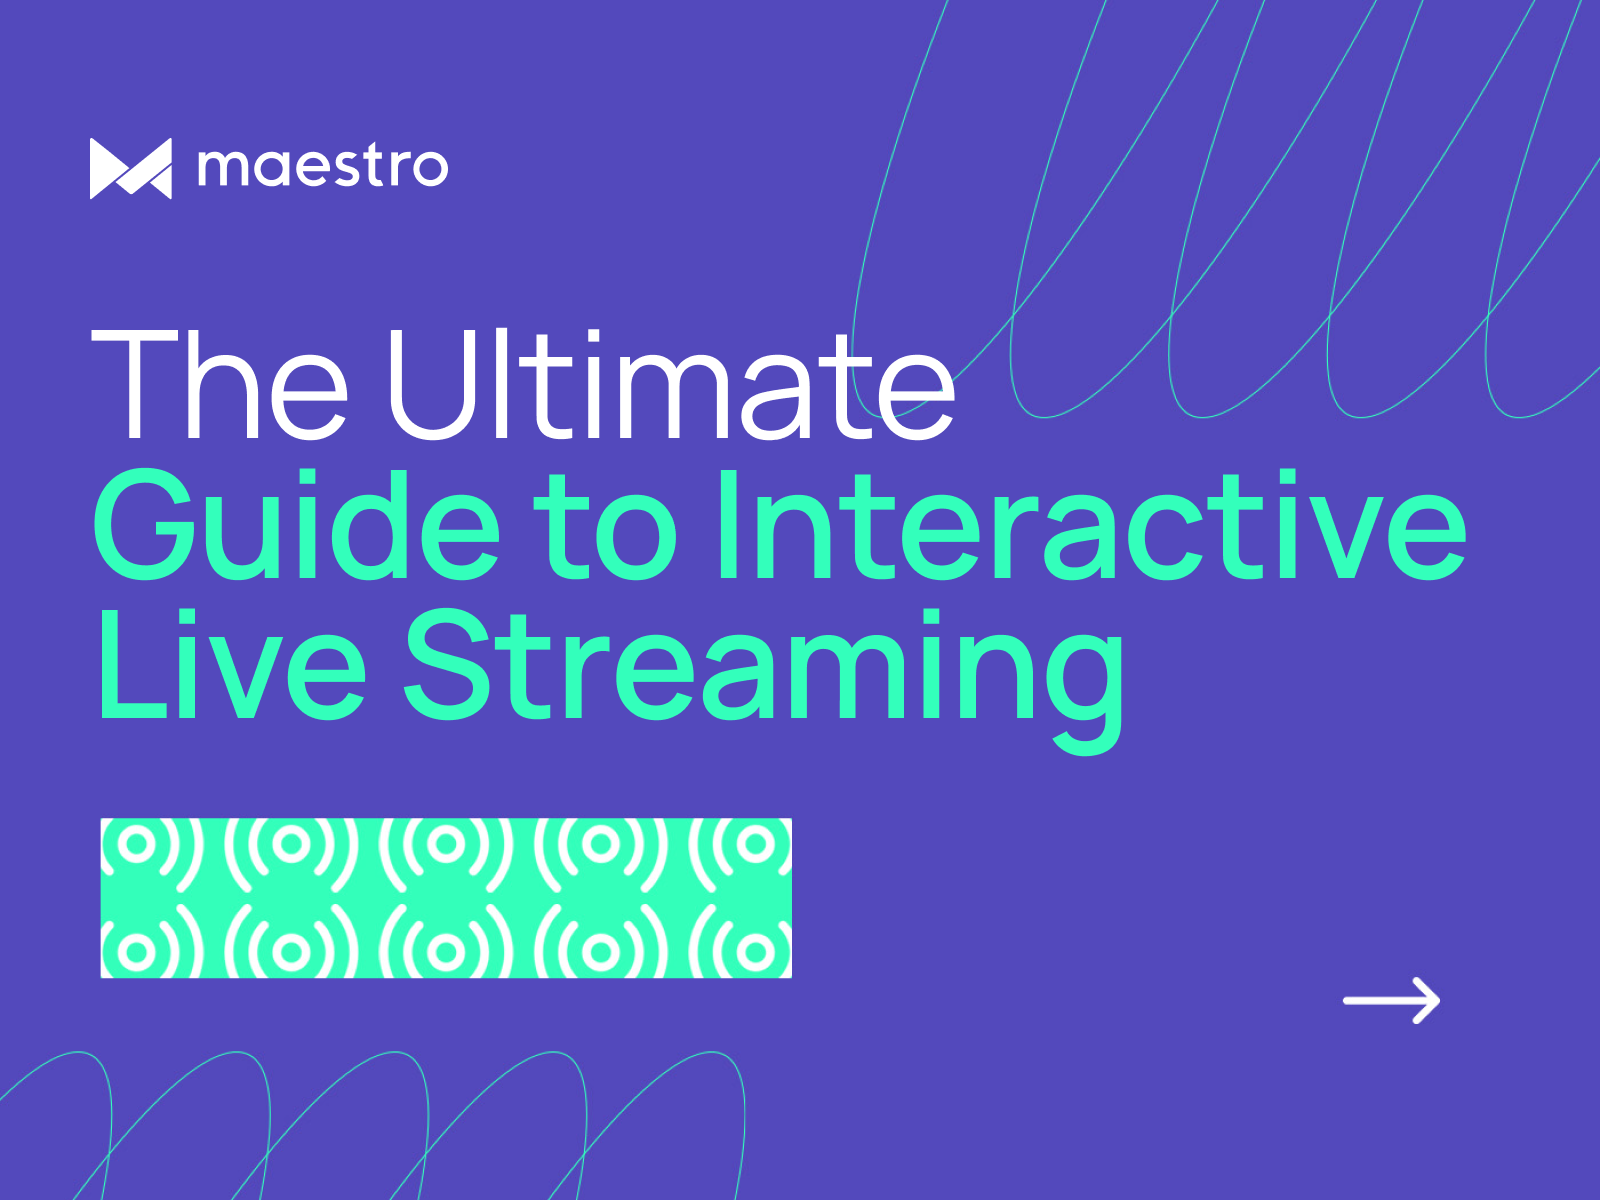 The ultimate guide to live streaming